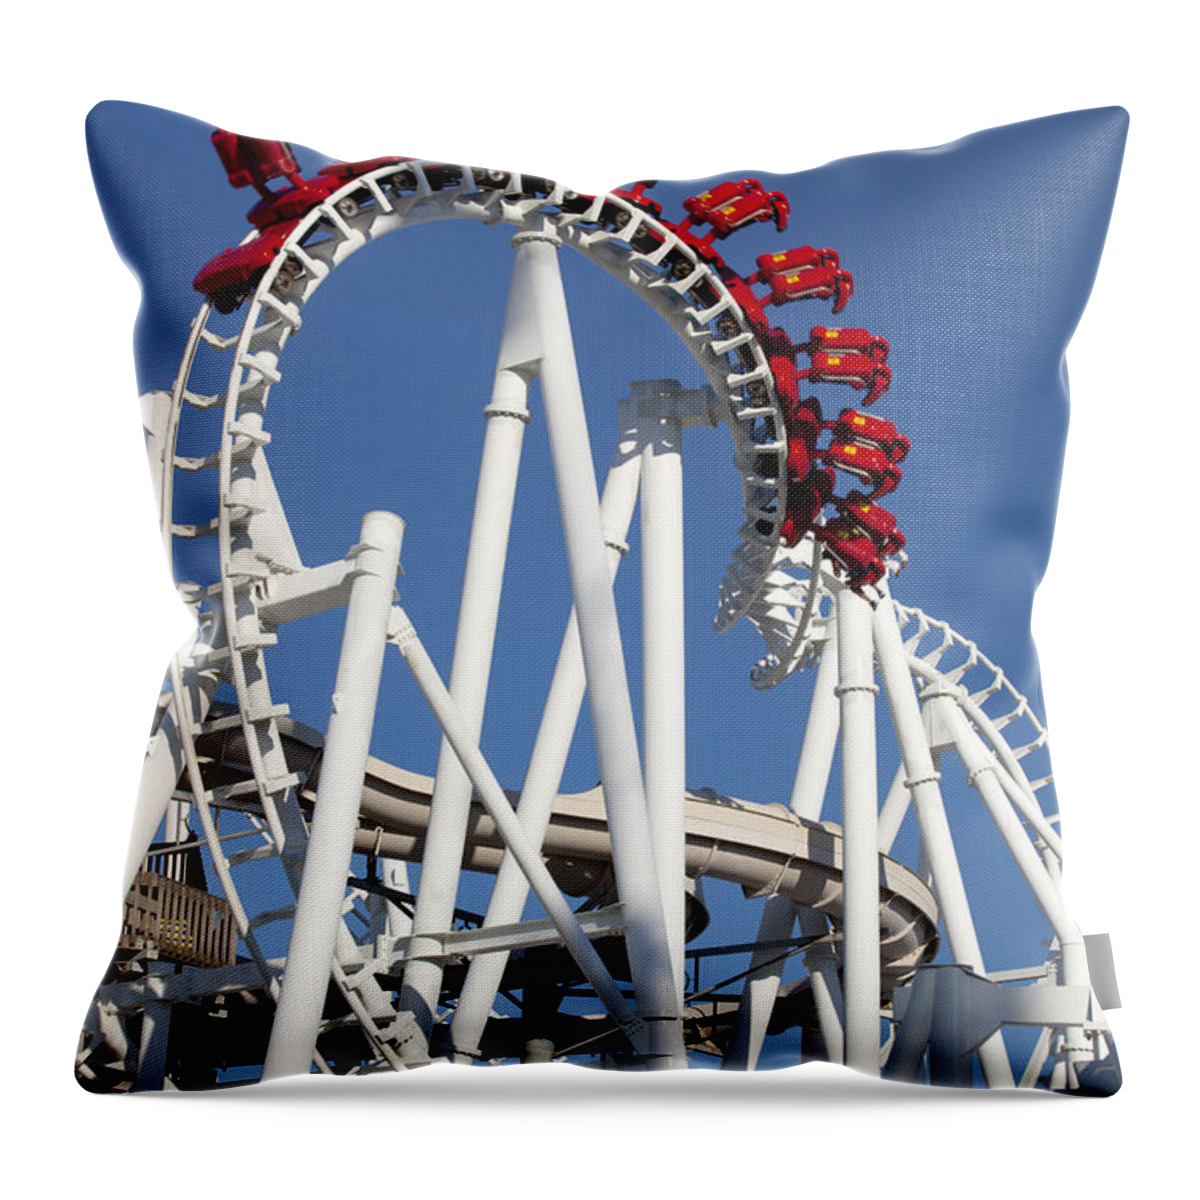 Wildwood Throw Pillow featuring the photograph Modern Rollercoaster #3 by Anthony Totah